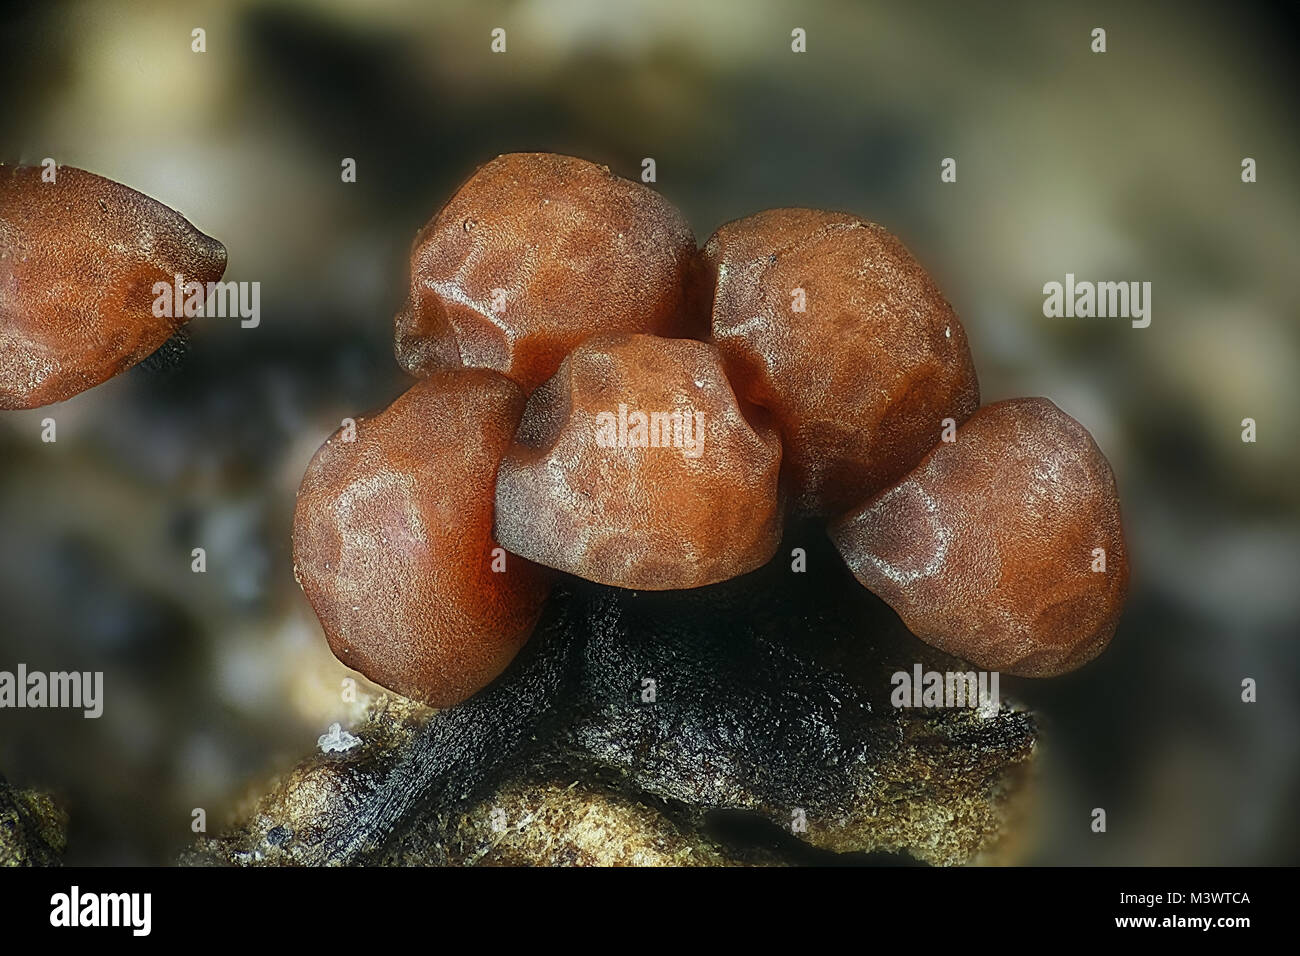 Hairy slime mold, Trichia varia, a microscope image. Field of view of the image is 7 mm. Stock Photo